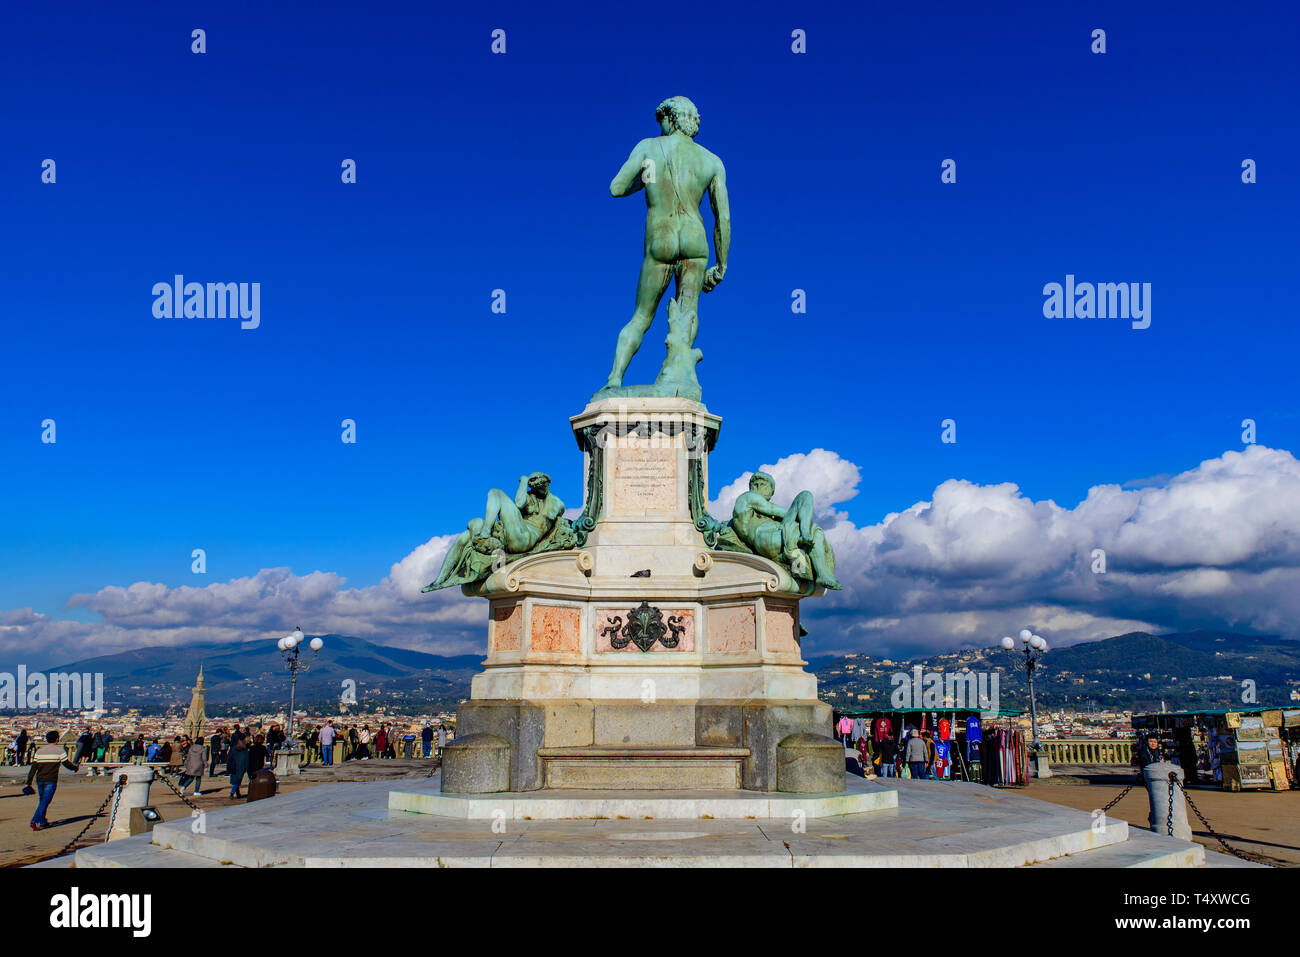 Piazzale Michelangelo (Michelangelo Square) with bronze statue of David, the square with panoramic view of Florence, Italy Stock Photo